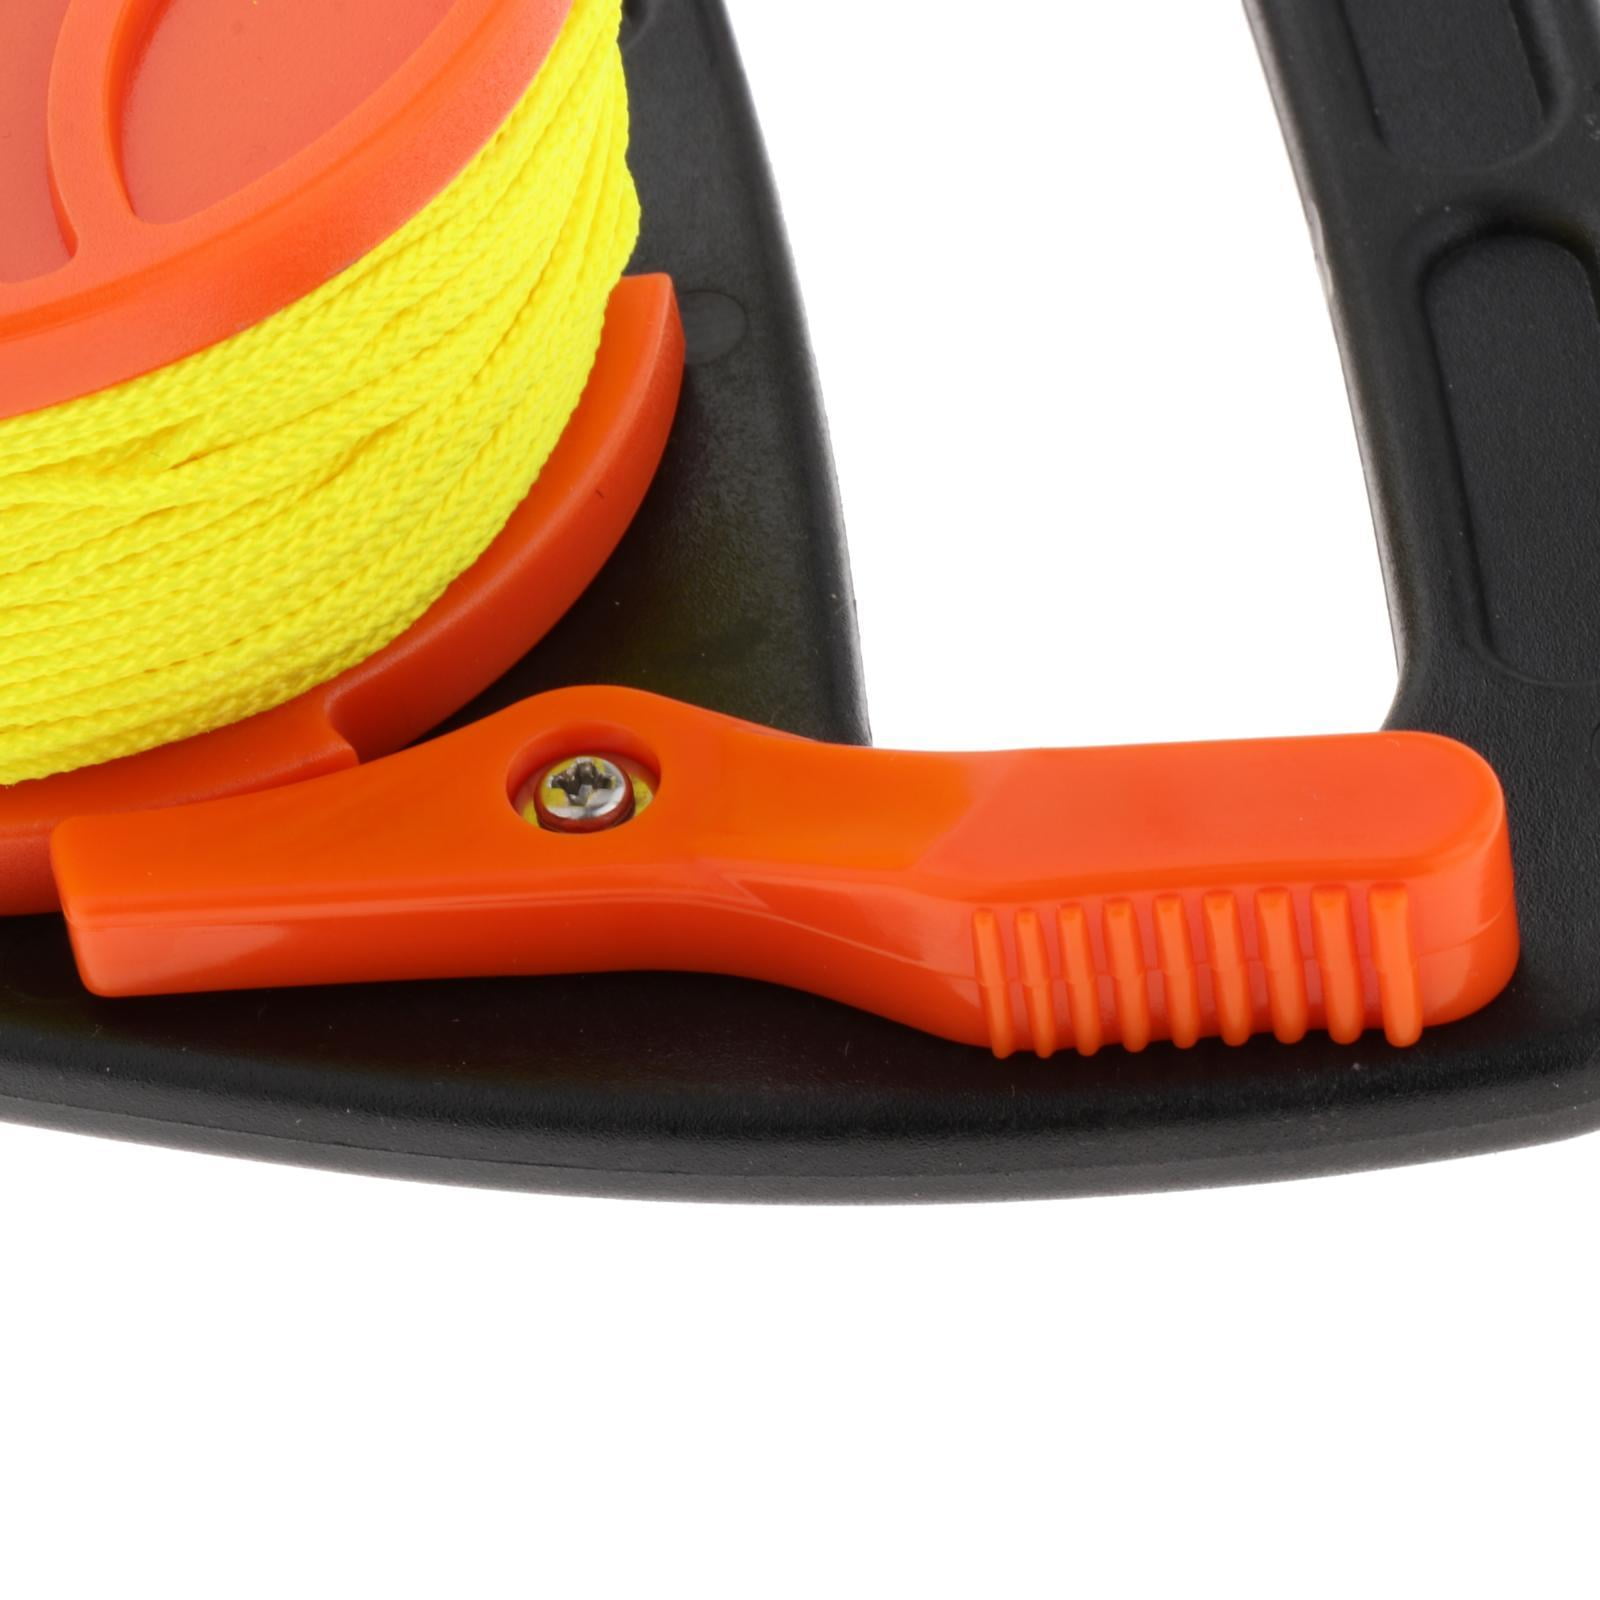 Kesoto Multi Purposeheavy Duty Scuba Diving Reel with Handle Yellow Line with for , Kayaking, Recreational Diving Snorkeling Orange 46m, Size: Multiple Sizes